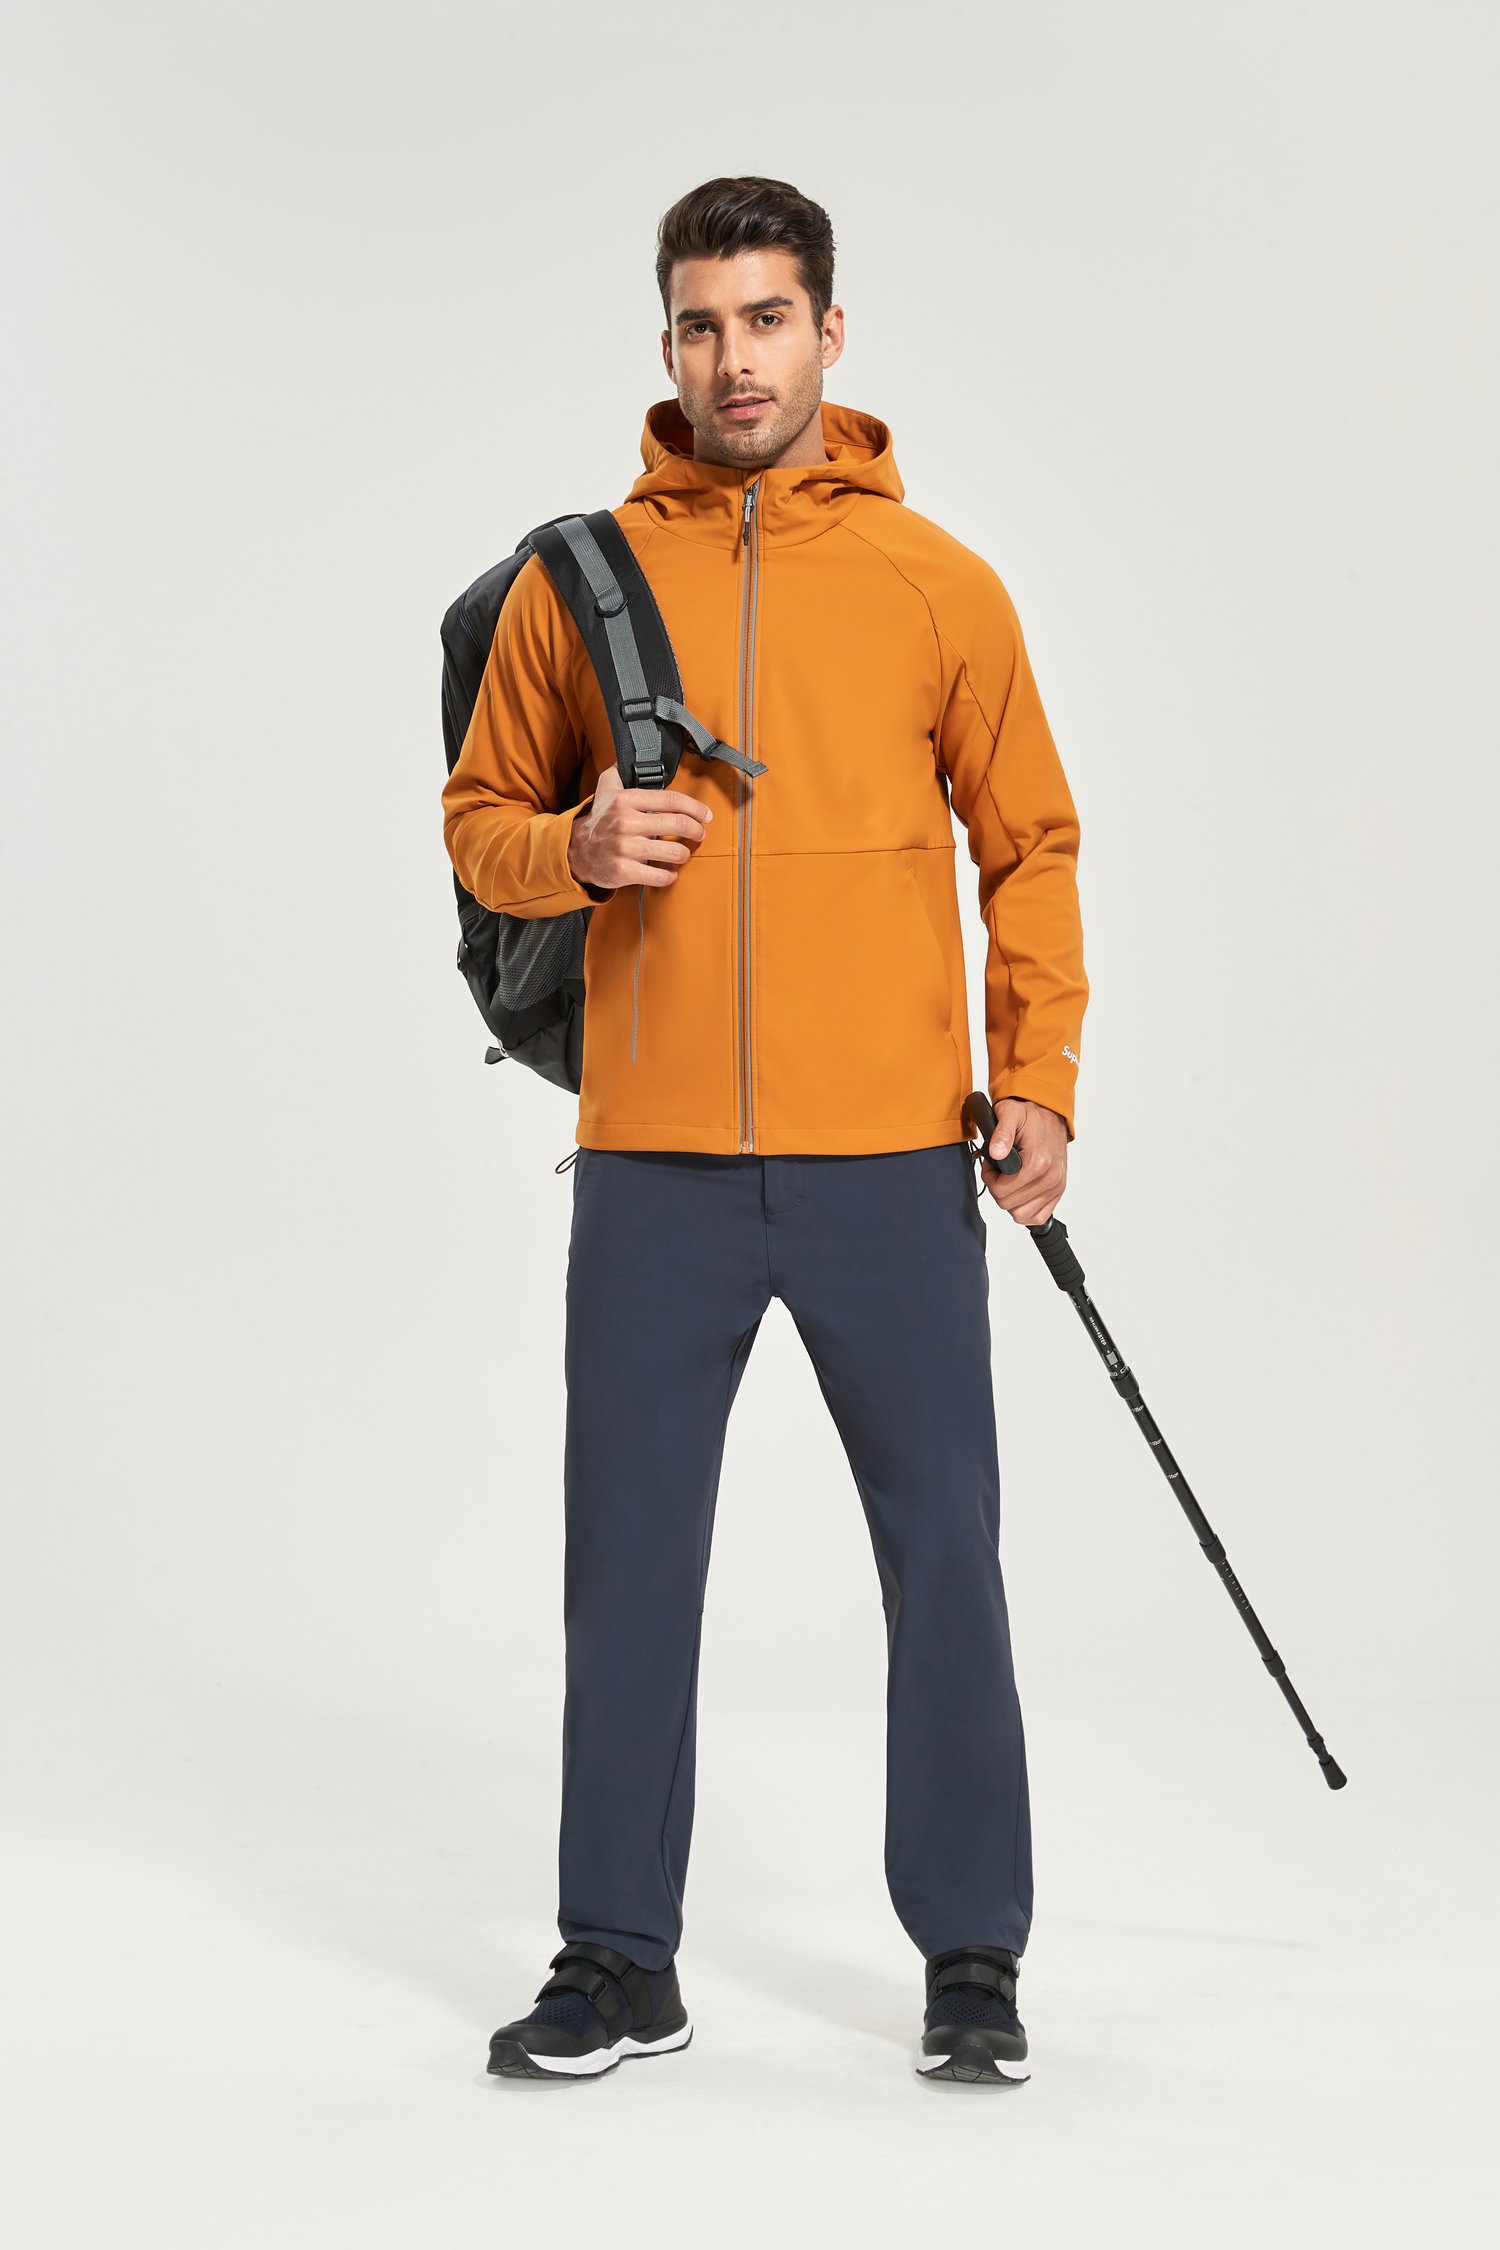 Outdoor Clothing & Technical Outerwear | OEM/ODM